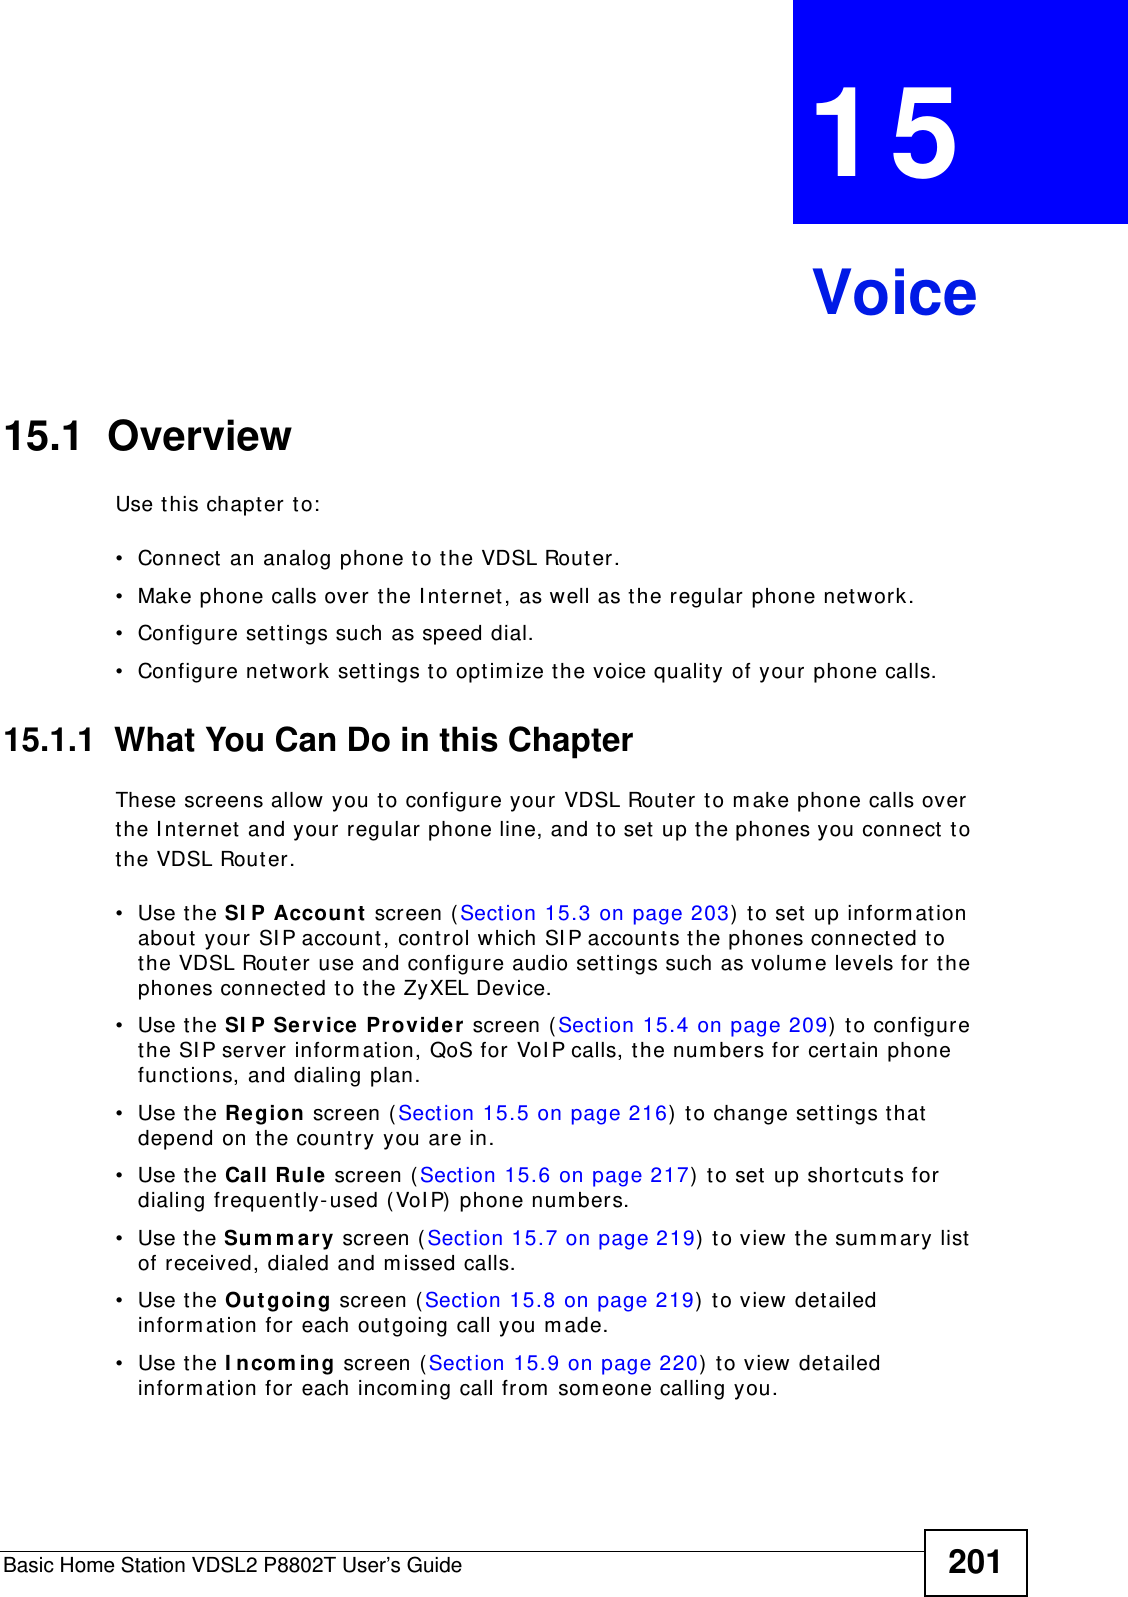 Basic Home Station VDSL2 P8802T User’s Guide 201CHAPTER  15 Voice15.1  OverviewUse t his chapter t o:• Connect  an analog phone t o the VDSL Router.• Make phone calls over the I nt ernet, as well as the regular phone net work.• Configure set t ings such as speed dial.• Configure network settings t o opt im ize t he voice qualit y of your phone calls.15.1.1  What You Can Do in this ChapterThese screens allow you t o configure your VDSL Router to m ake phone calls over the I nt ernet  and your regular phone line, and to set up t he phones you connect  t o the VDSL Router.• Use the SI P Account screen (Sect ion 15.3 on page 203)  t o set up inform at ion about your SI P account, cont rol which SI P accounts t he phones connected t o the VDSL Router use and configure audio settings such as volum e levels for t he phones connect ed to t he ZyXEL Device.• Use the SI P Se rvice Provide r  screen ( Sect ion 15.4 on page 209)  t o configure the SI P server inform at ion, QoS for VoI P calls, the num ber s for certain phone funct ions, and dialing plan. • Use the Region screen (Sect ion 15.5 on page 216)  to change set t ings that  depend on t he country you are in.• Use the Ca ll Rule screen (Section 15.6 on page 217)  t o set up short cuts for dialing frequently-used ( VoI P)  phone num bers.• Use the Su m m a ry screen ( Sect ion 15.7 on page 219)  t o view t he sum m ary list  of received, dialed and m issed calls.• Use the Ou t going  screen ( Sect ion 15.8 on page 219)  t o view detailed inform at ion for each outgoing call you m ade.• Use the I ncom ing screen (Sect ion 15.9 on page 220)  to view det ailed inform ation for each incom ing call from  som eone calling you.